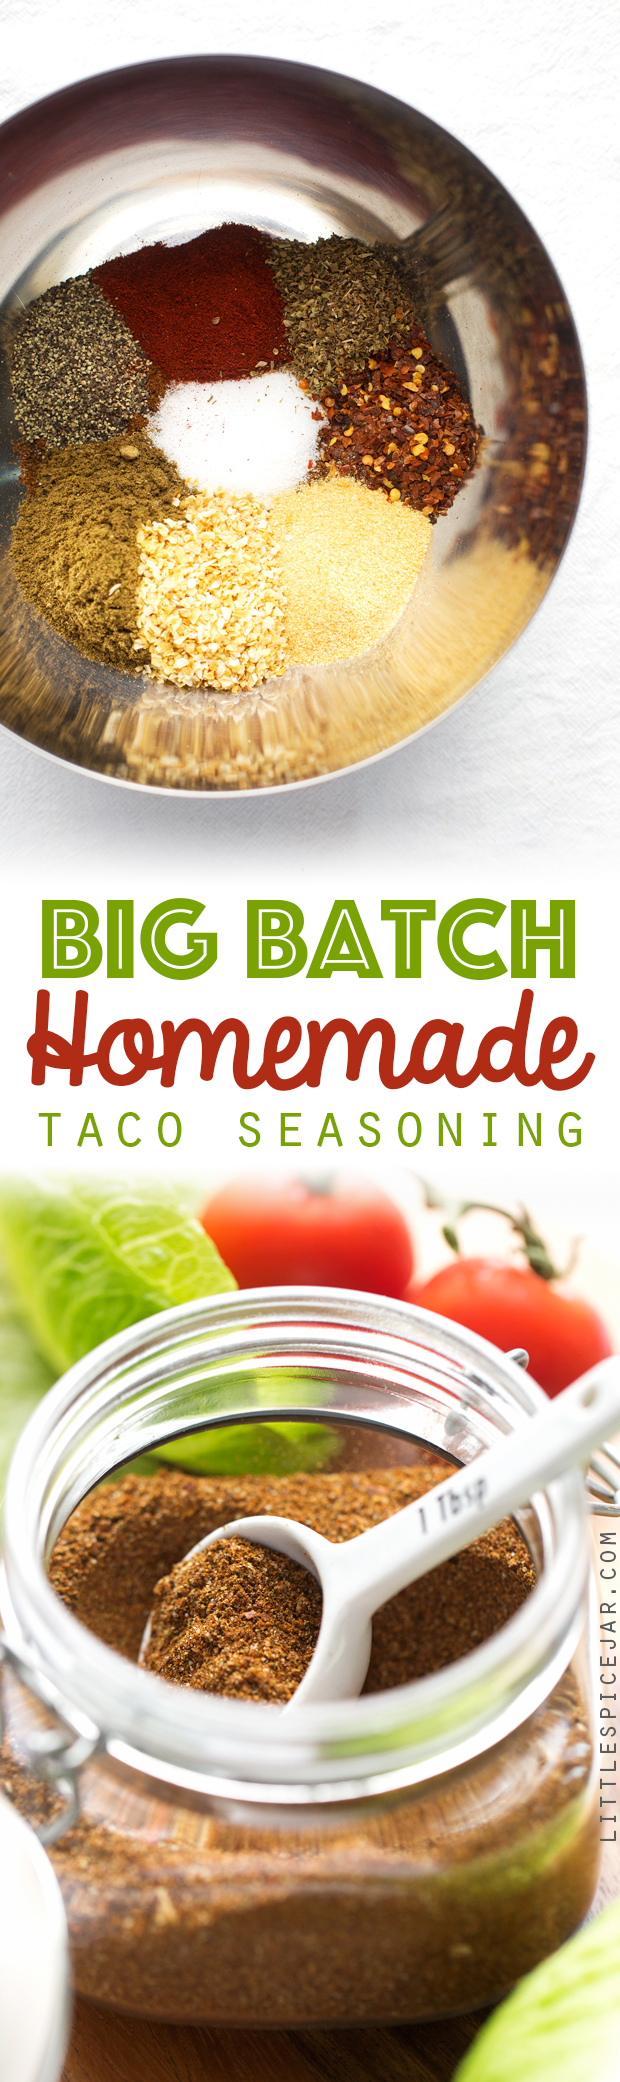 Big Batch Homemade Taco Seasoning - Learn how to make taco seasoning at home with ingredients you already have in your pantry! #taco #tacoseasoning #seasoning #homemade | Littlespicejar.com